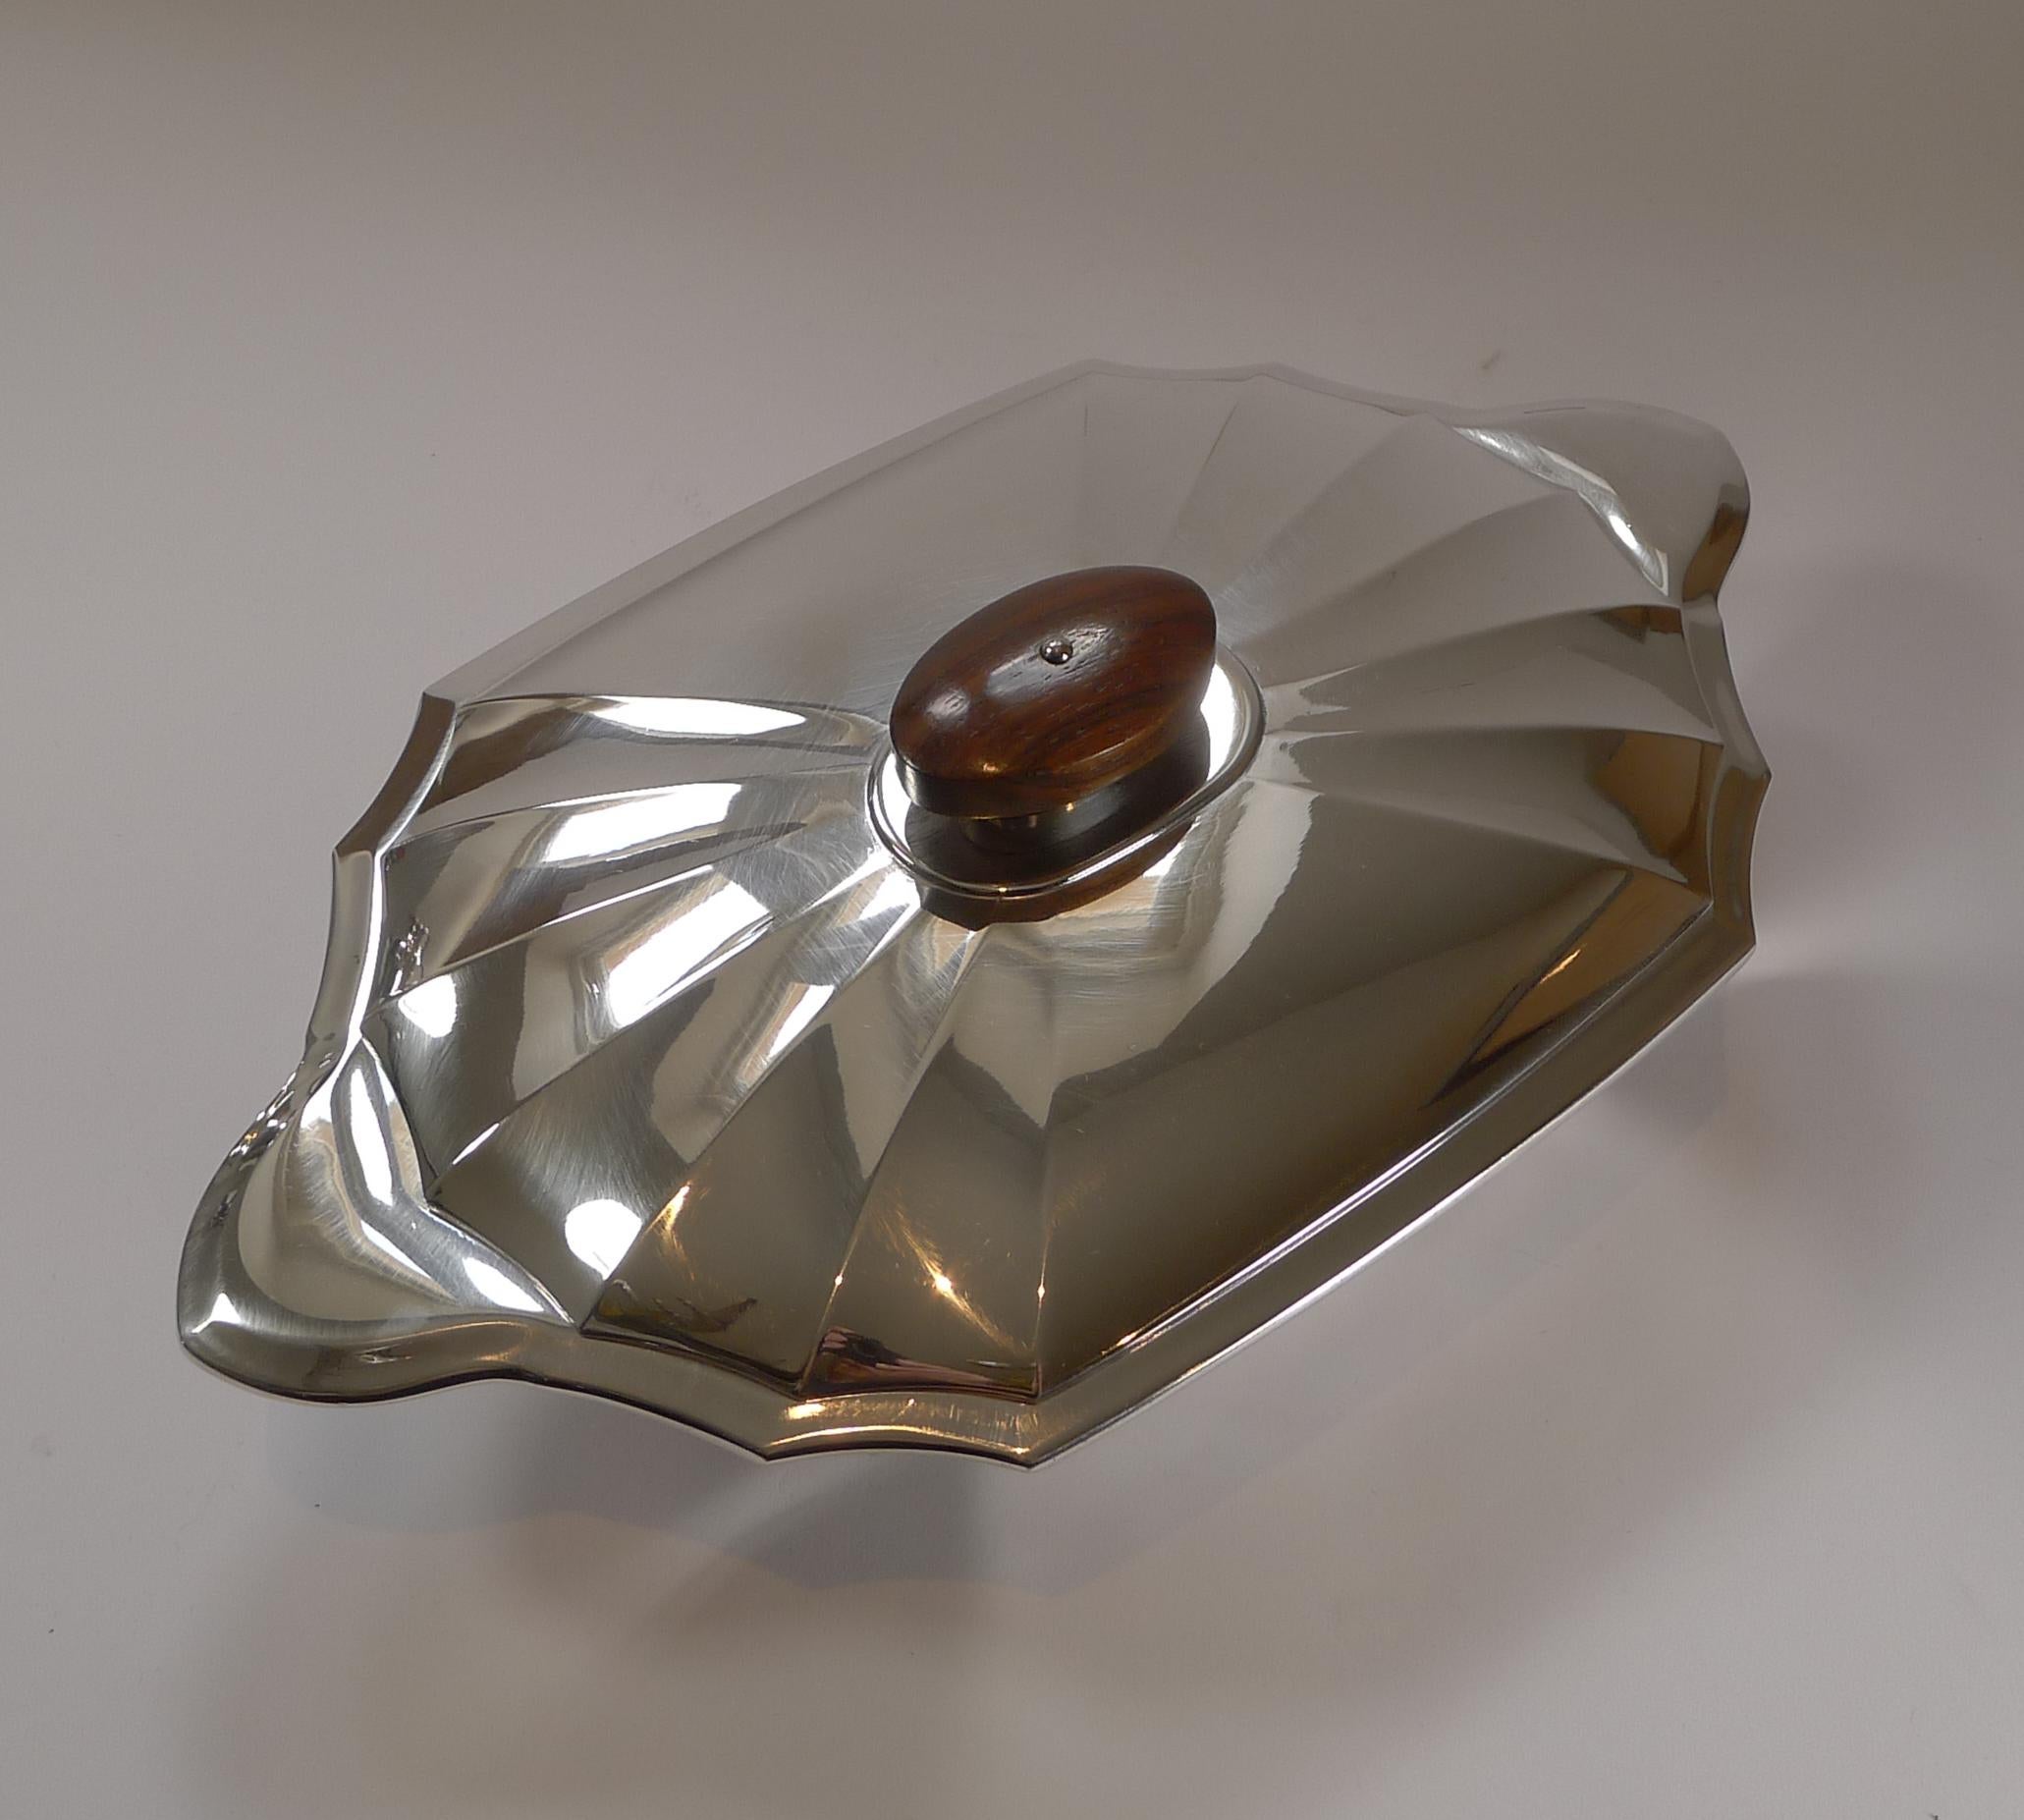 French Art Deco Christofle / Gallia Covered Serving Dish, c. 1930 For Sale 1